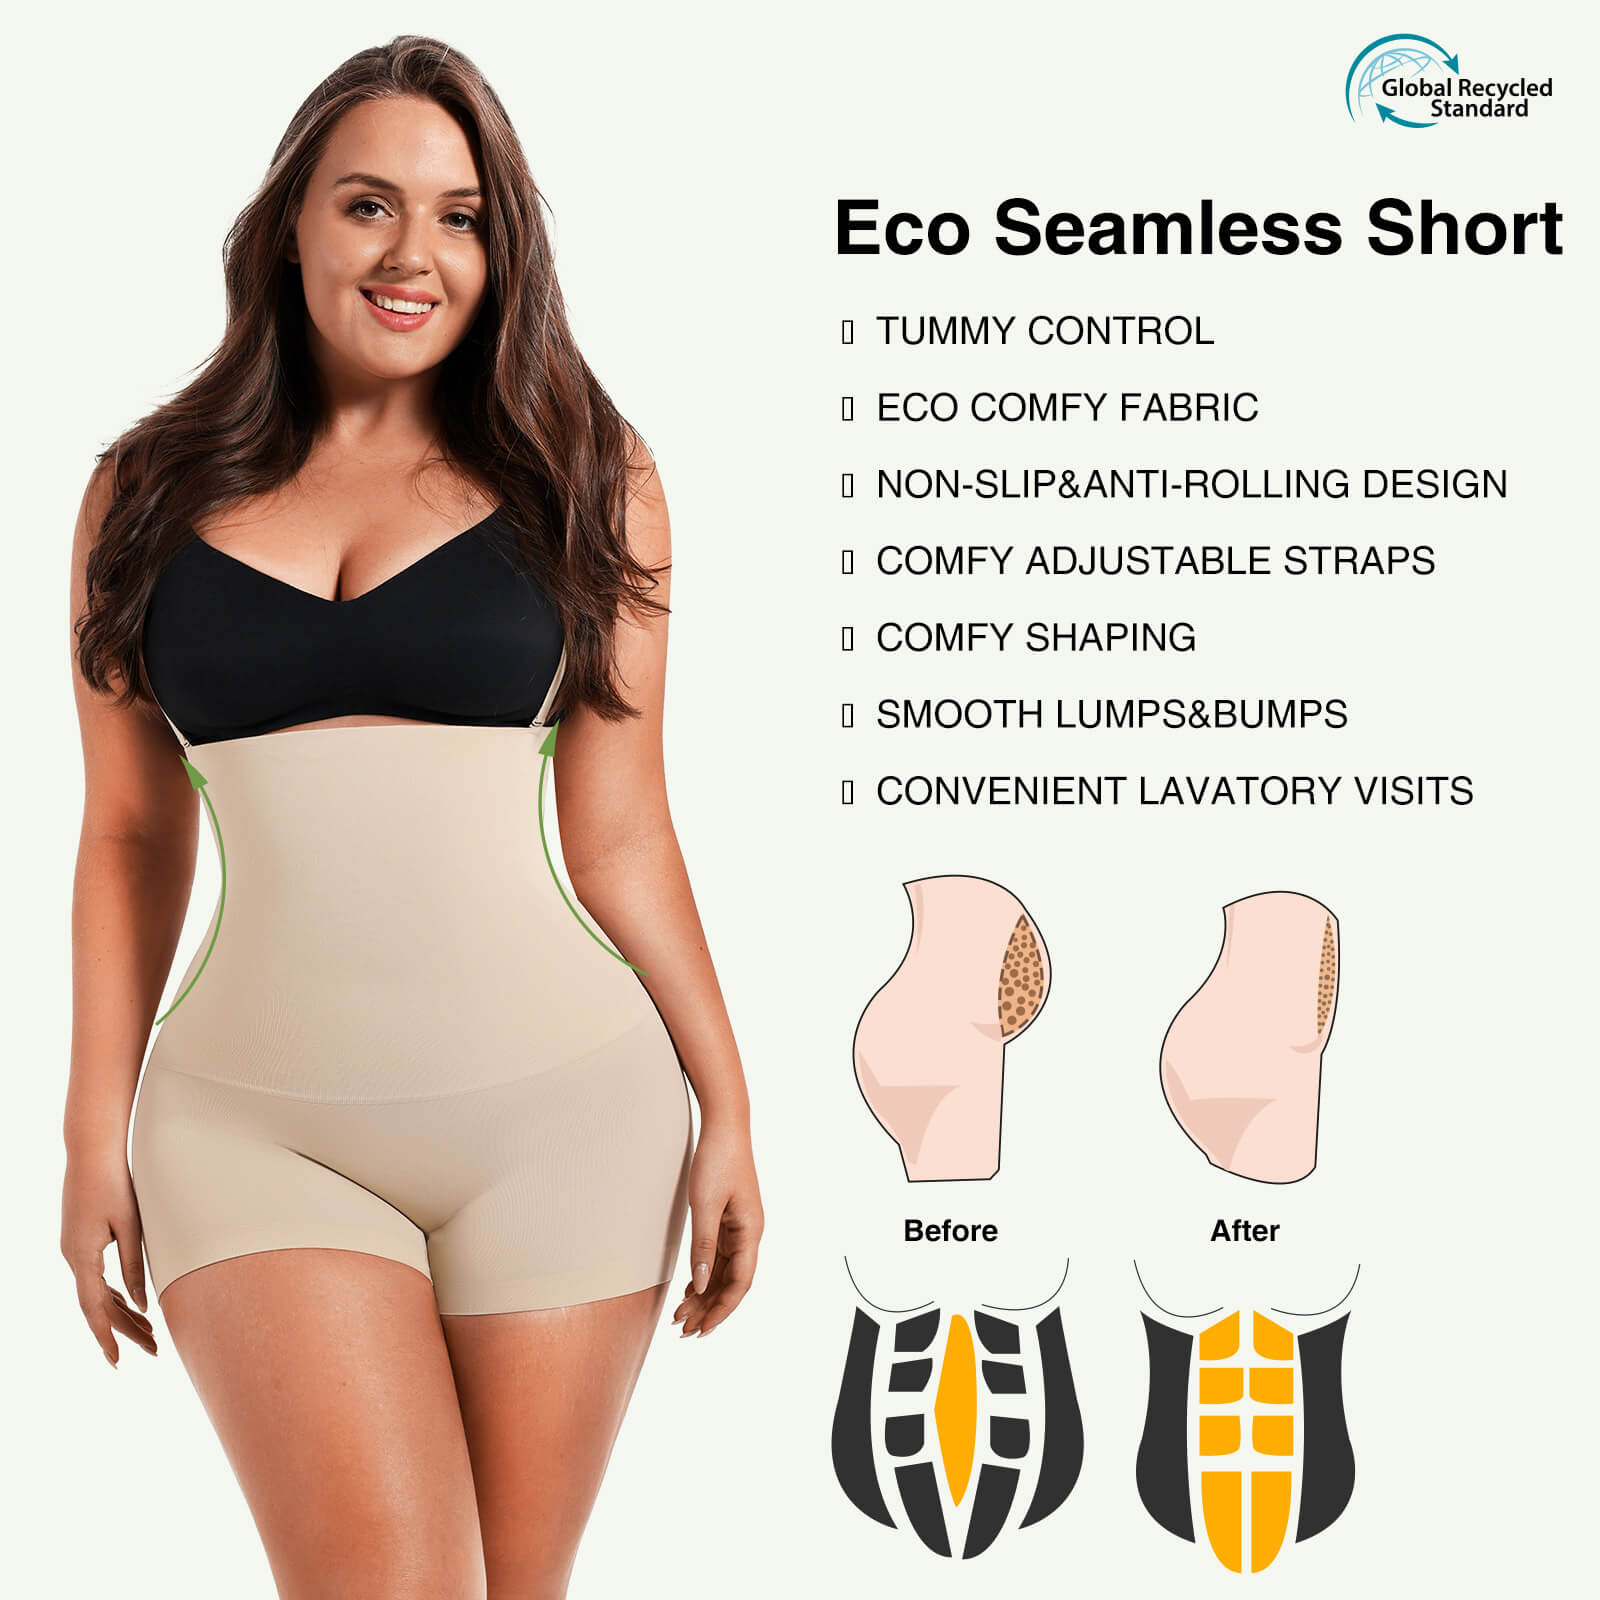 Wholesale Strengthen Black High Waisted Shapewear With Bra Clips Tight